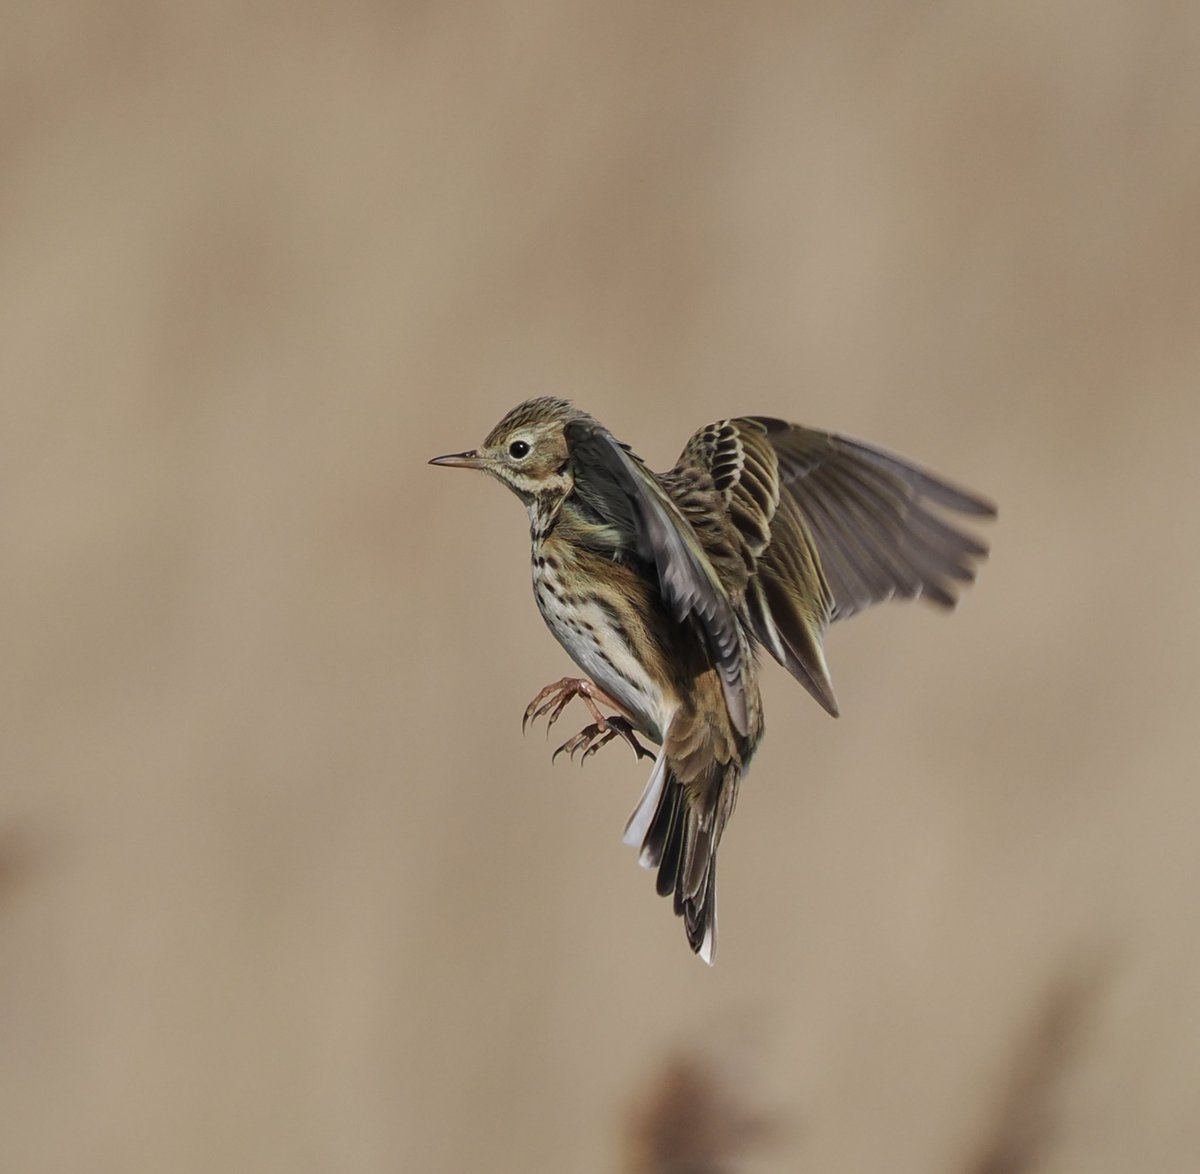 Interesting behaviour One of a pair of Meadow Pipit hovering 2m above a patch of long grass in the dunes at Dunwich. A Pied Wag then joined them Ideas? #birds #birdphotography #wildlife #wildlifephotography #nature #NaturePhotography @Natures_Voice @suffolkwildlife @BtoSuffolk